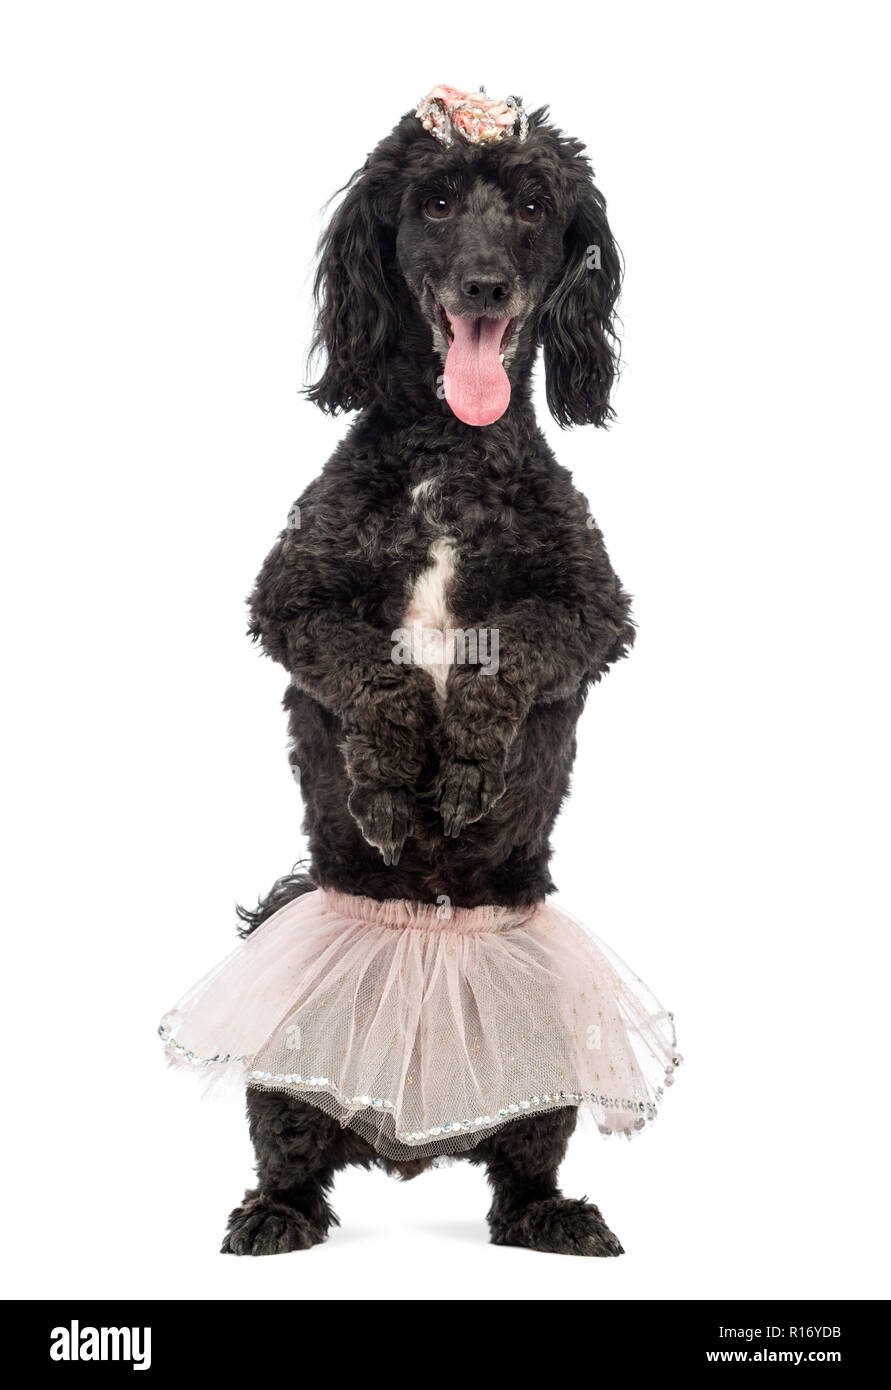 Poodle, 5 years old, standing on hind legs, wearing a pink tutu and panting in front of white background Stock Photo